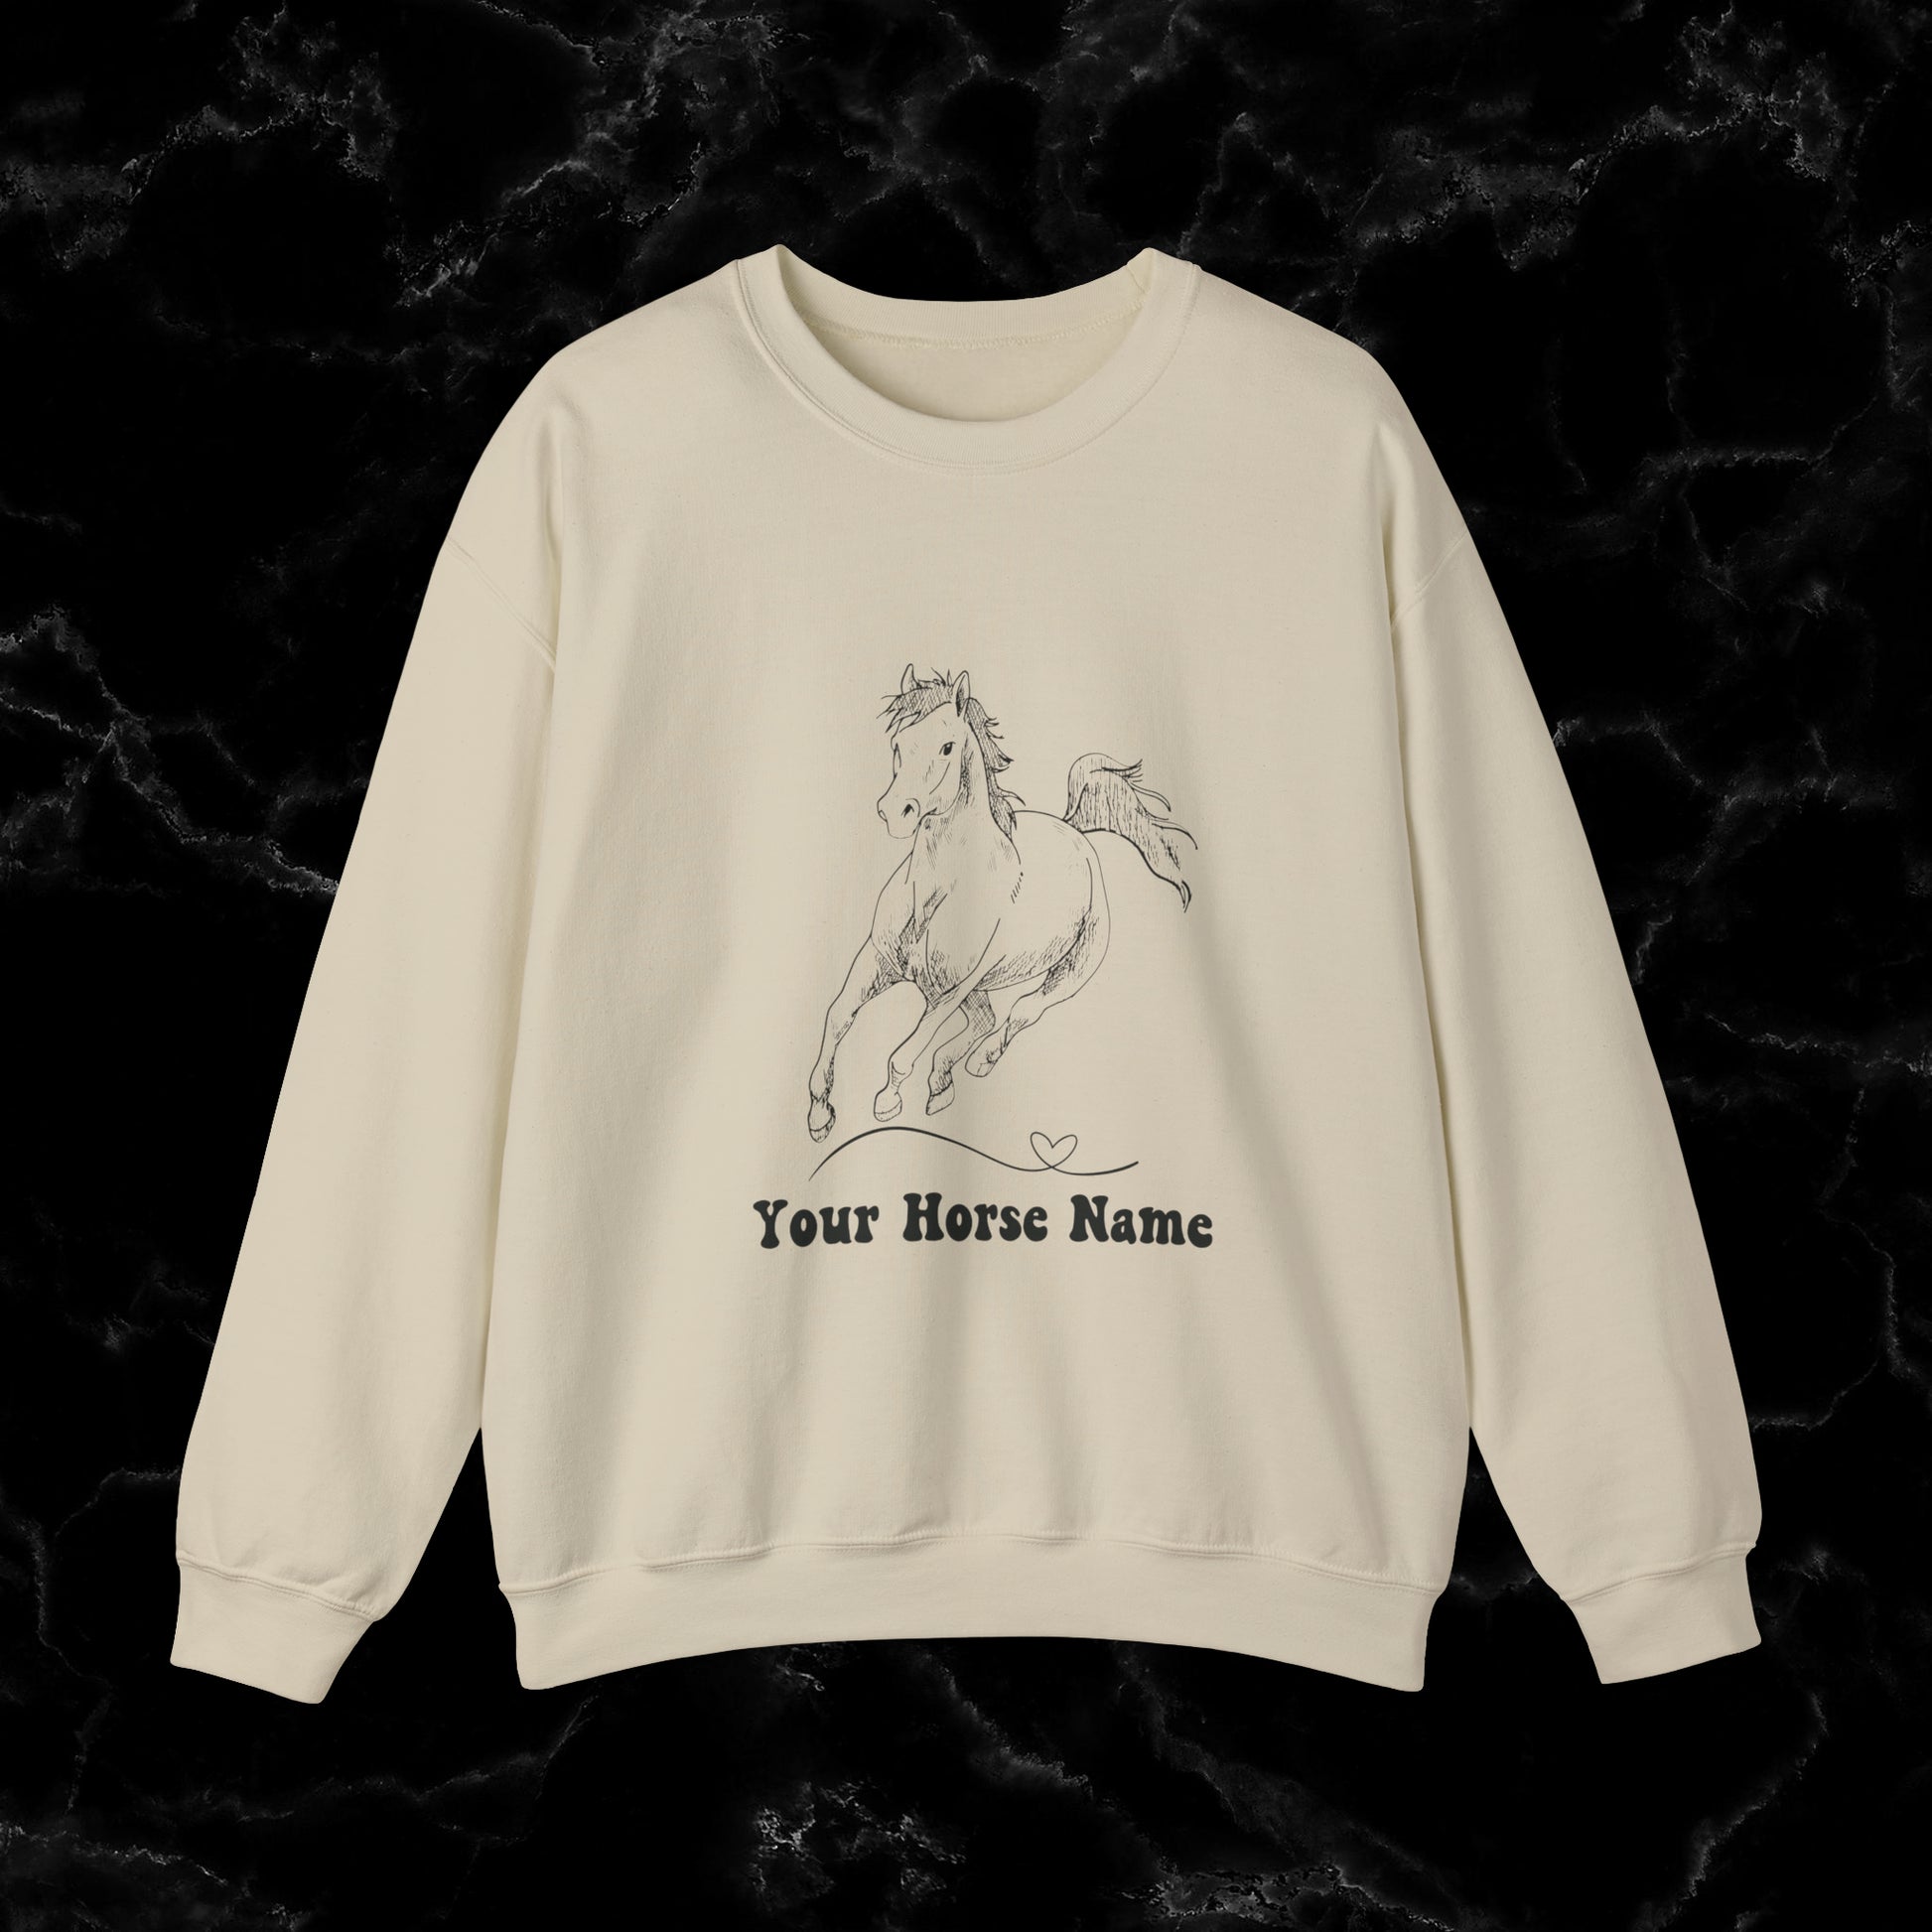 Personalized Horse Sweatshirt - Gift for Horse Owner, Perfect for Christmas, Birthdays, and Equestrian Enthusiasts - Wrap Up Warmth and Personal Connection with this Thoughtful Horse Lover's Gift Sweatshirt S Sand 